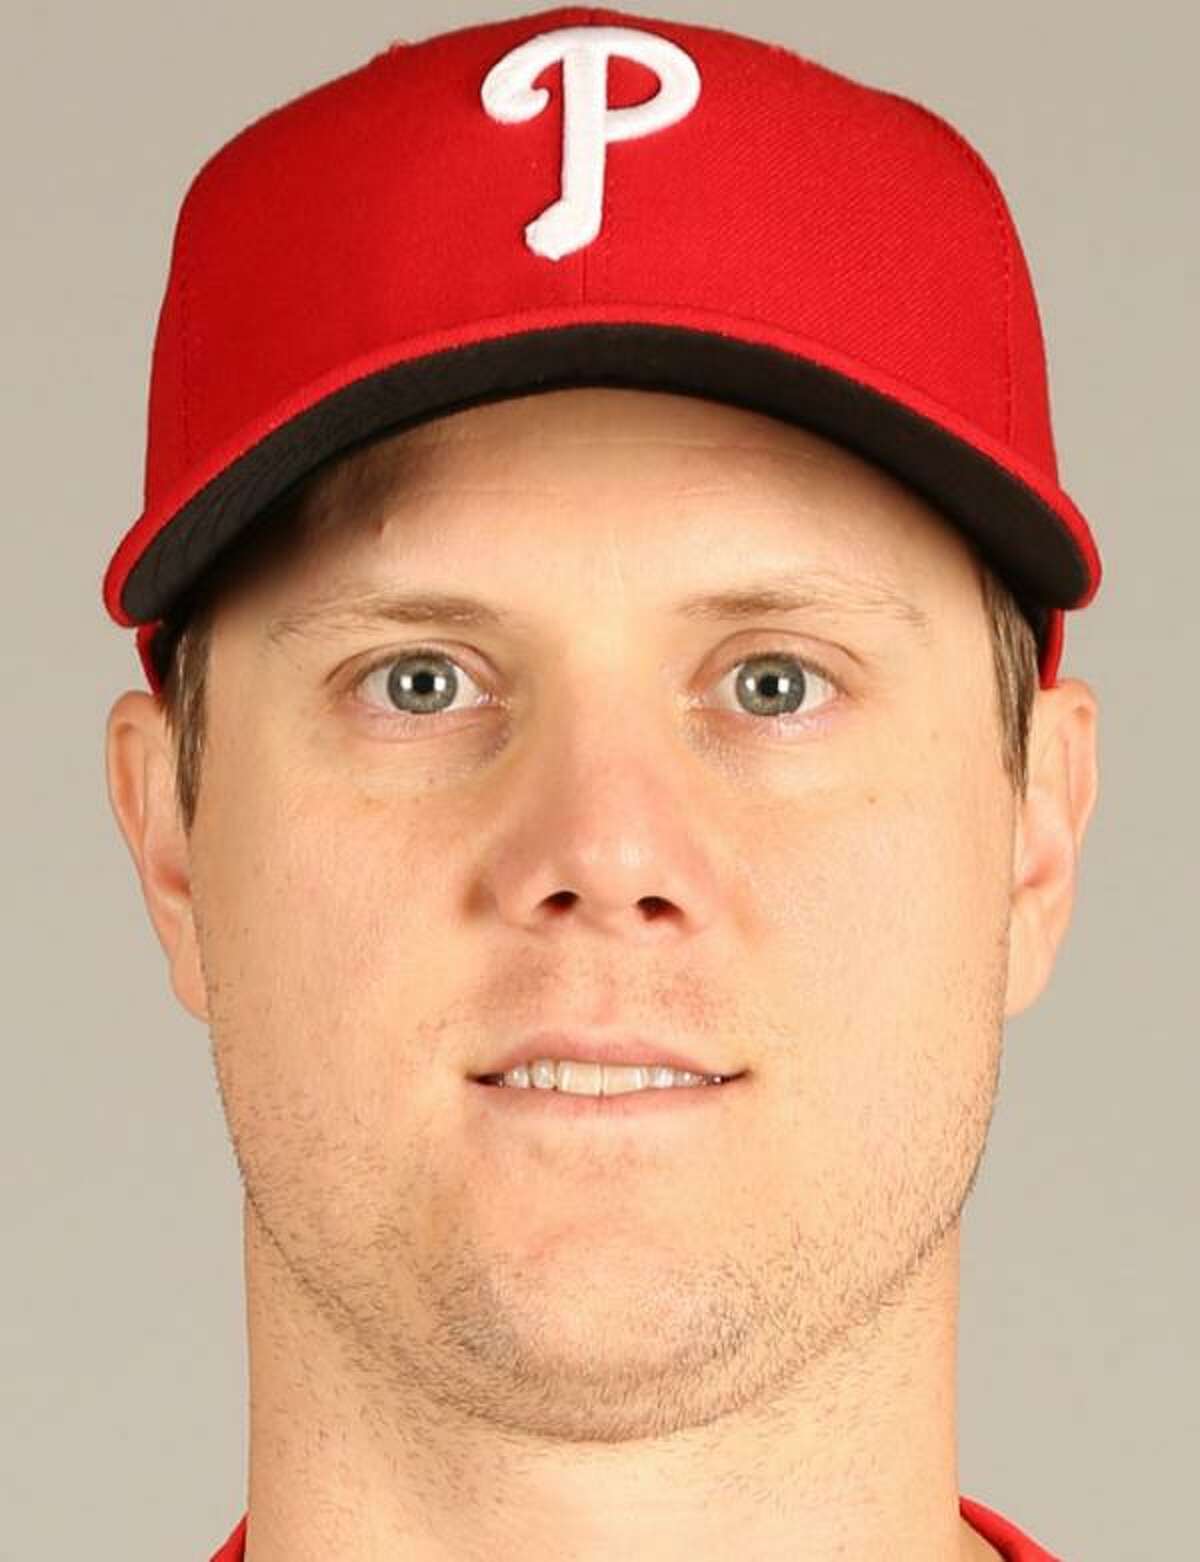 All-Star Game report: Phils closer Papelbon amenable to any trade